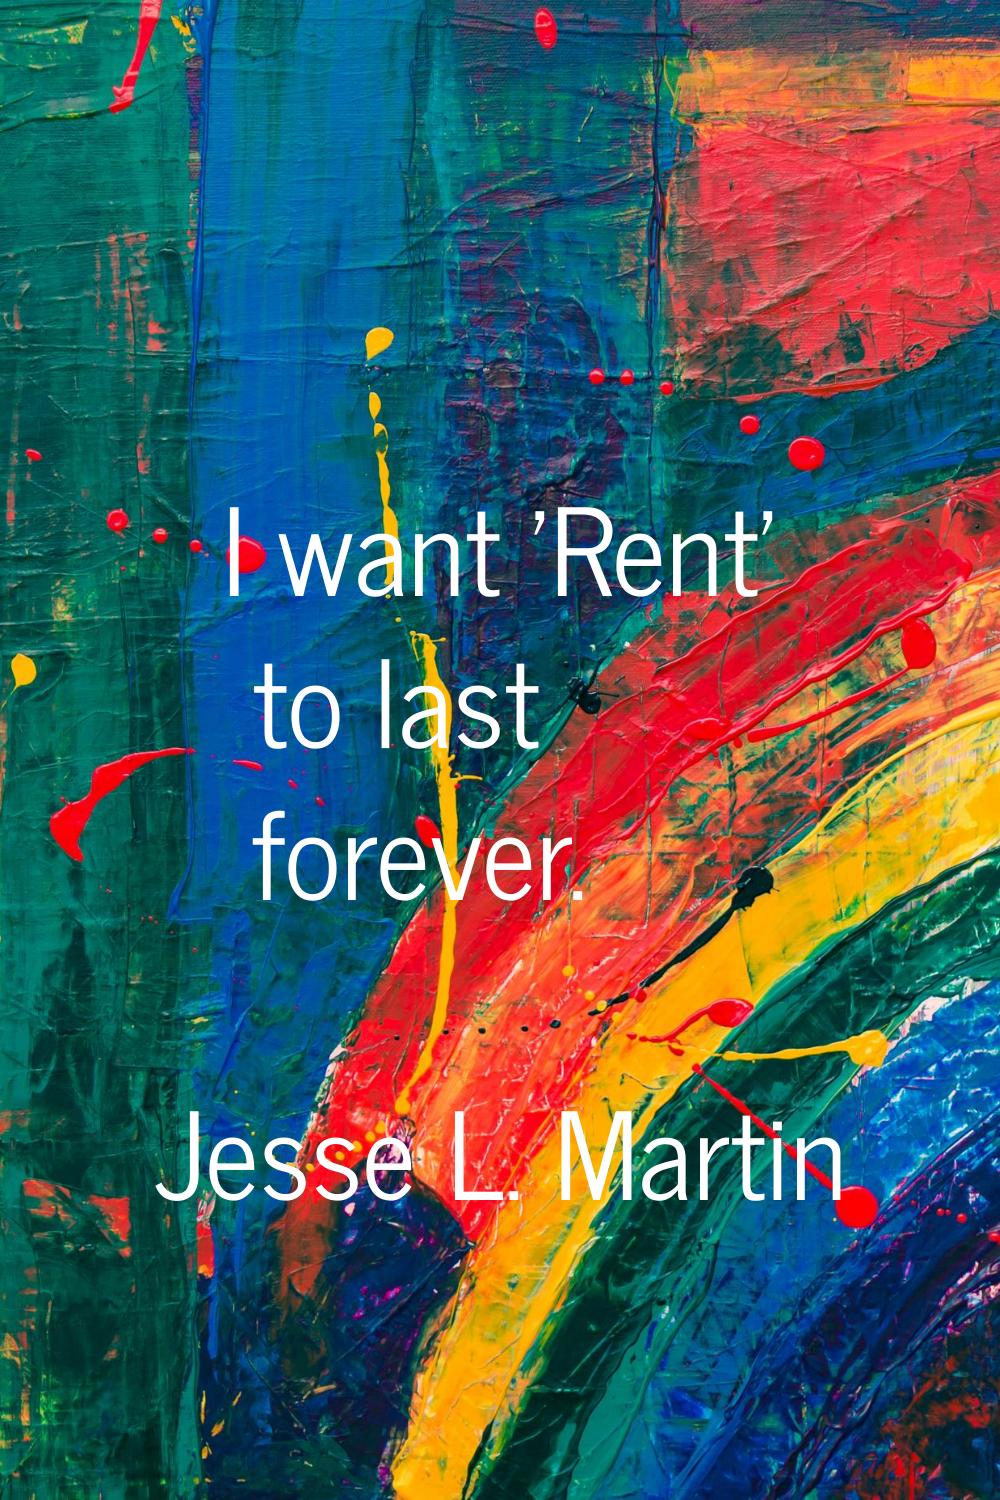 I want 'Rent' to last forever.